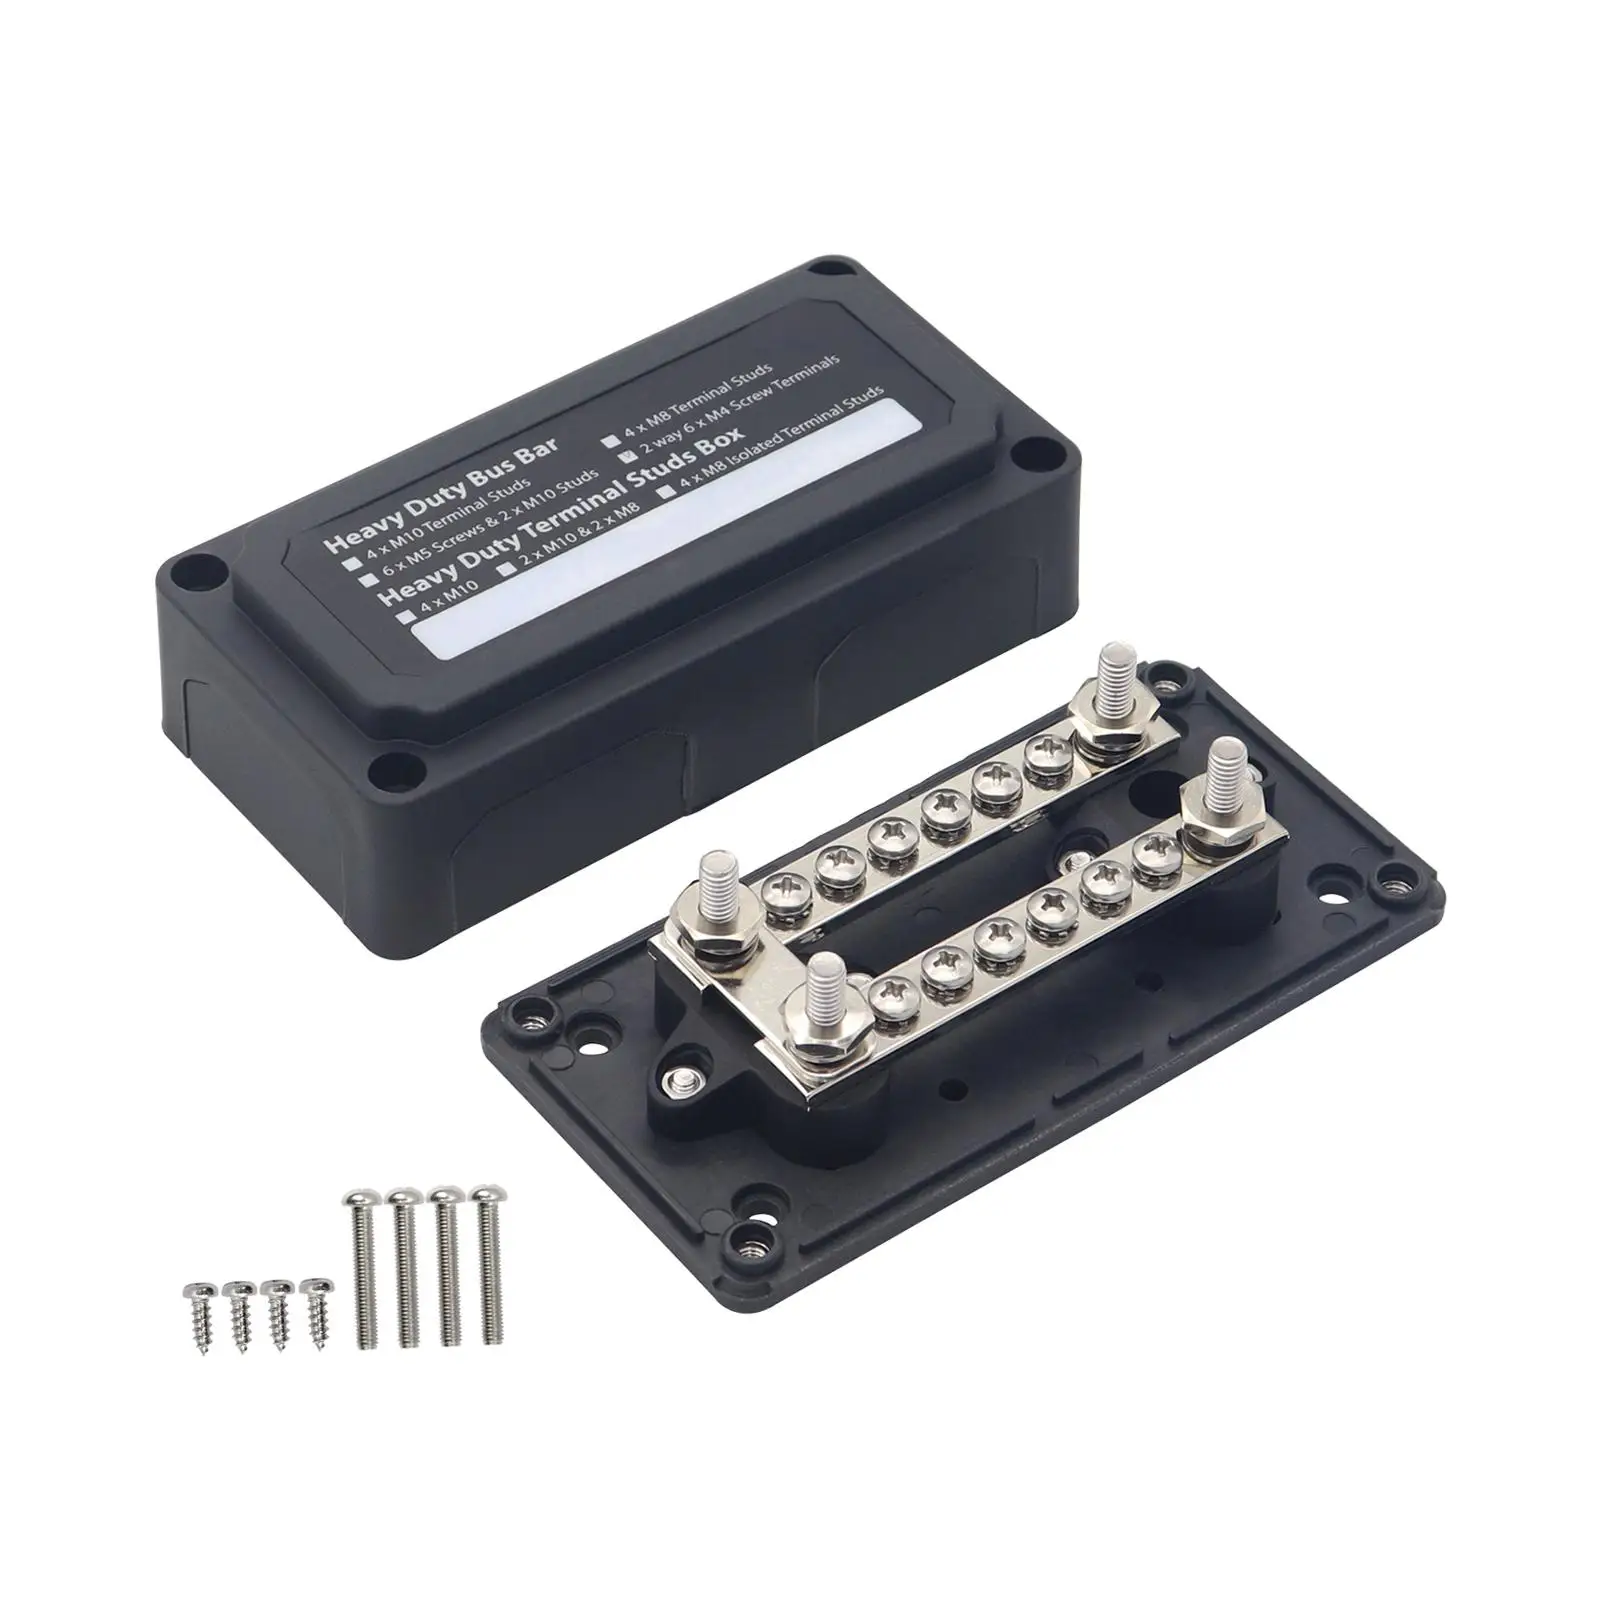 Power Distribution Block Bus Bar with Cover Accessories Replacement Terminal Stud Terminal Block for Automotive RV Boats